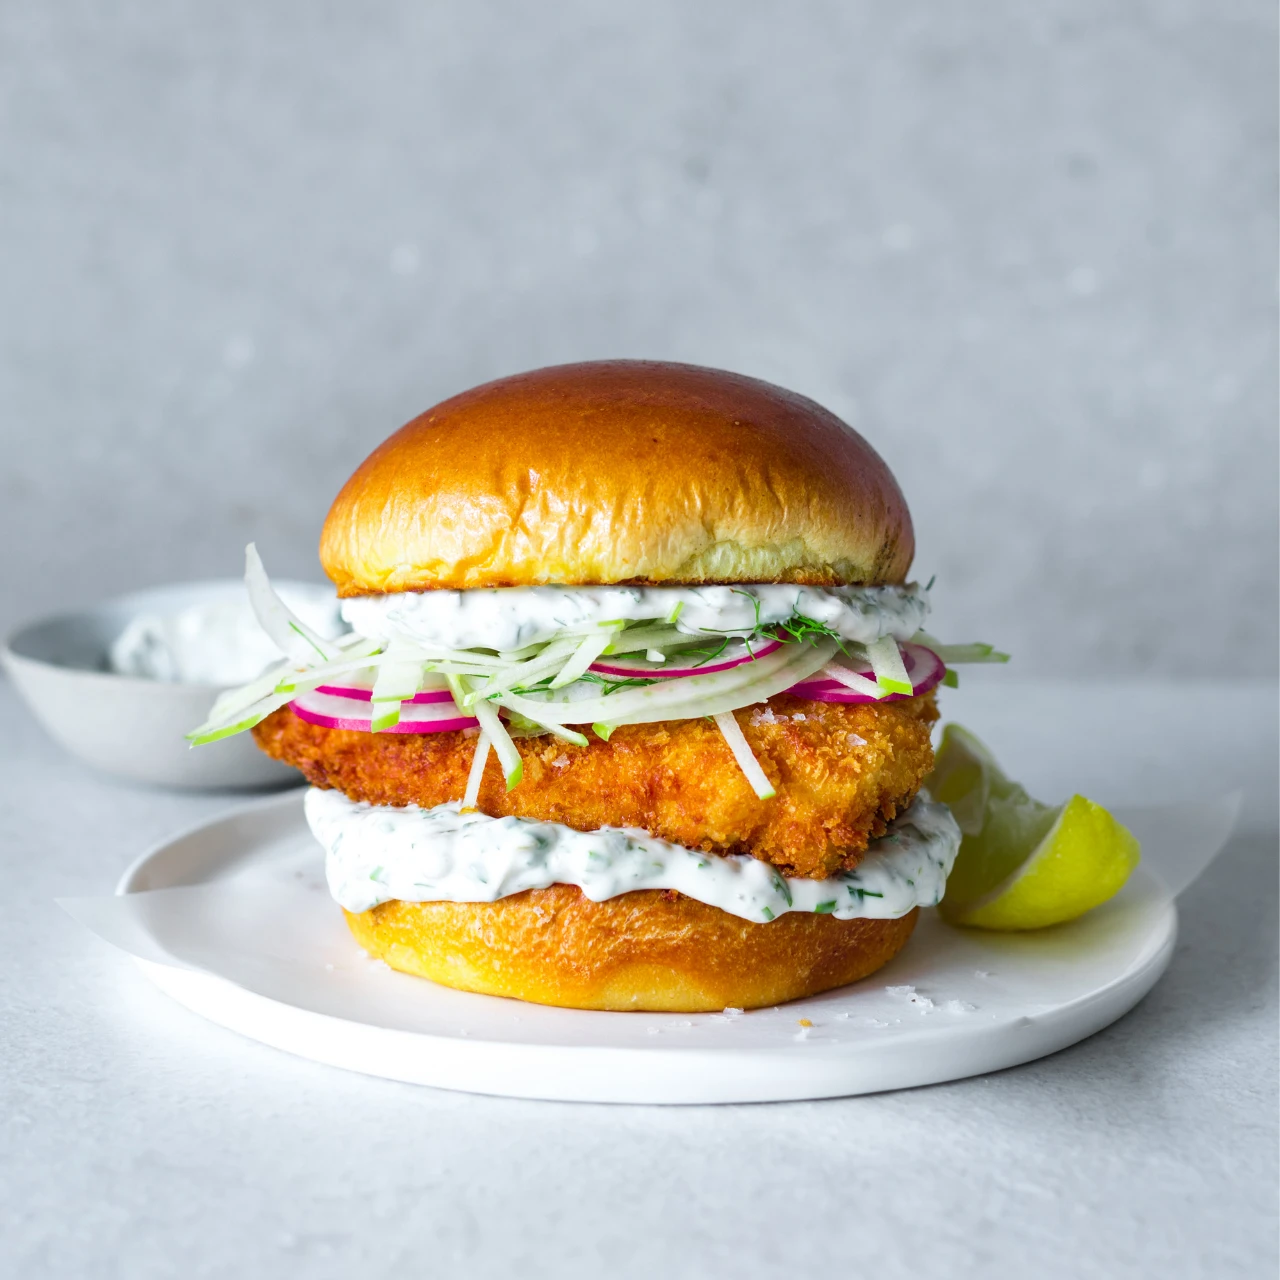 The best fish burger recipe made with panko  breadcrumbs, burger buns and mayonnaise. Serve with homemade chunky chips.